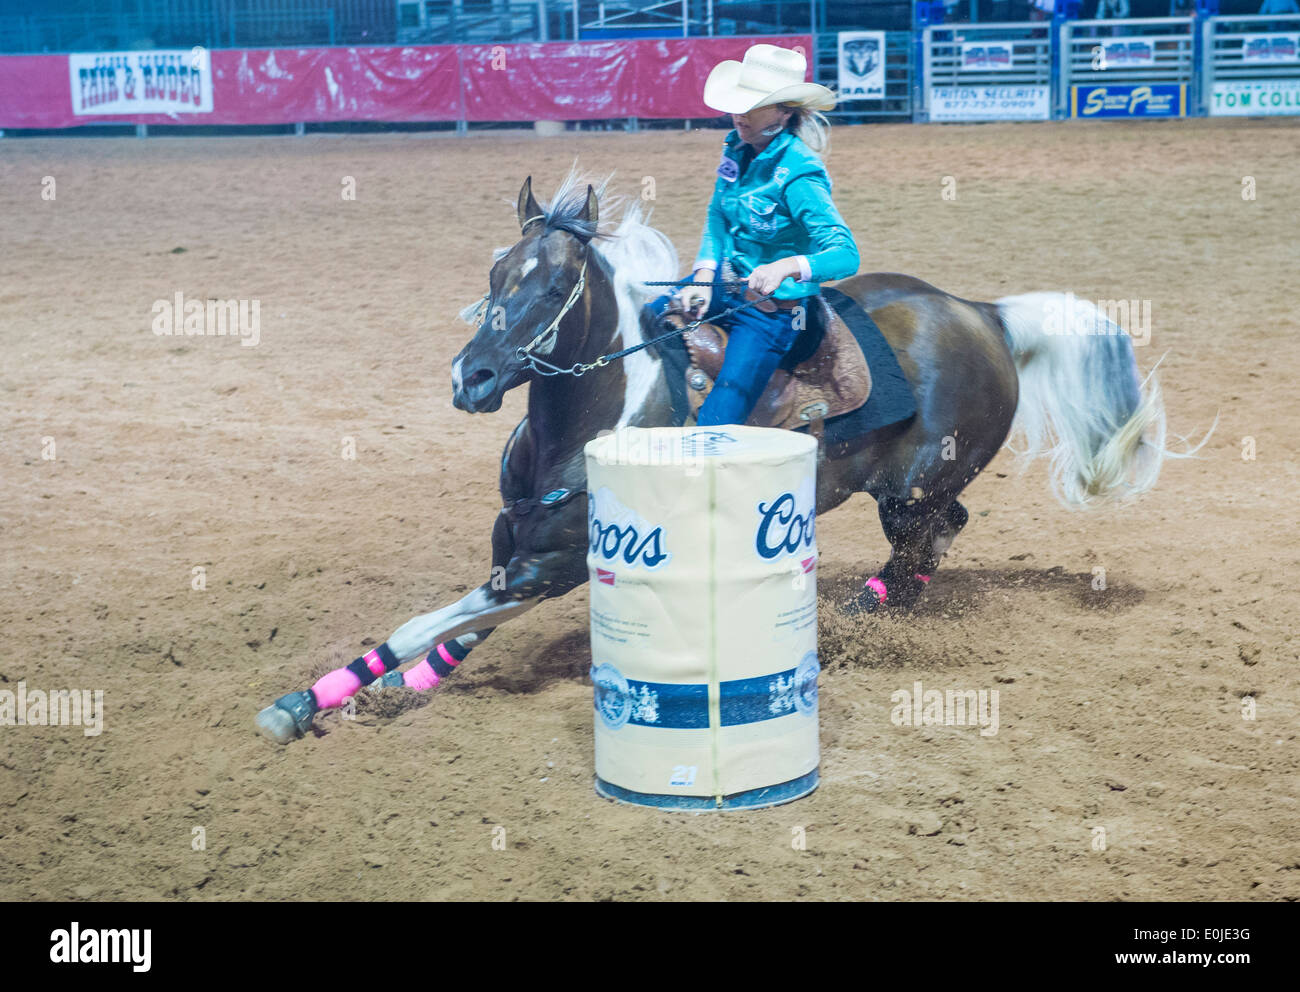 Cowgirl Participating in a Barrel racing competition in the Clark County Rodeo a Professional Rodeo held in Logandale Nevada Stock Photo